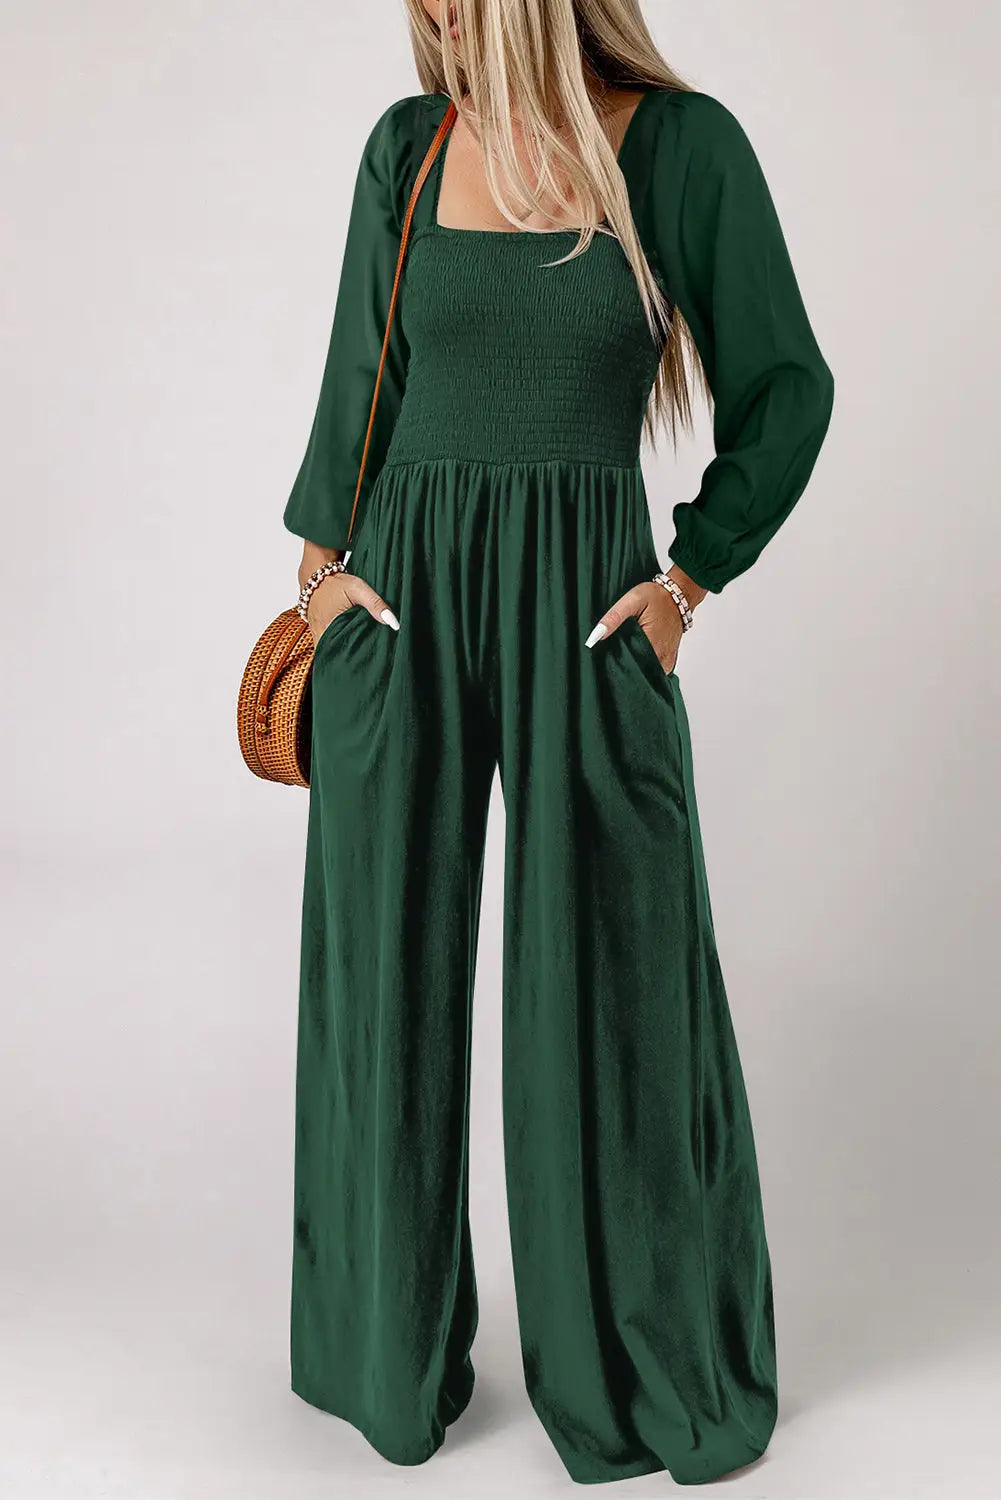 Black smocked square neck long sleeve wide leg jumpsuit - green / s / 100% polyester - jumpsuits & rompers